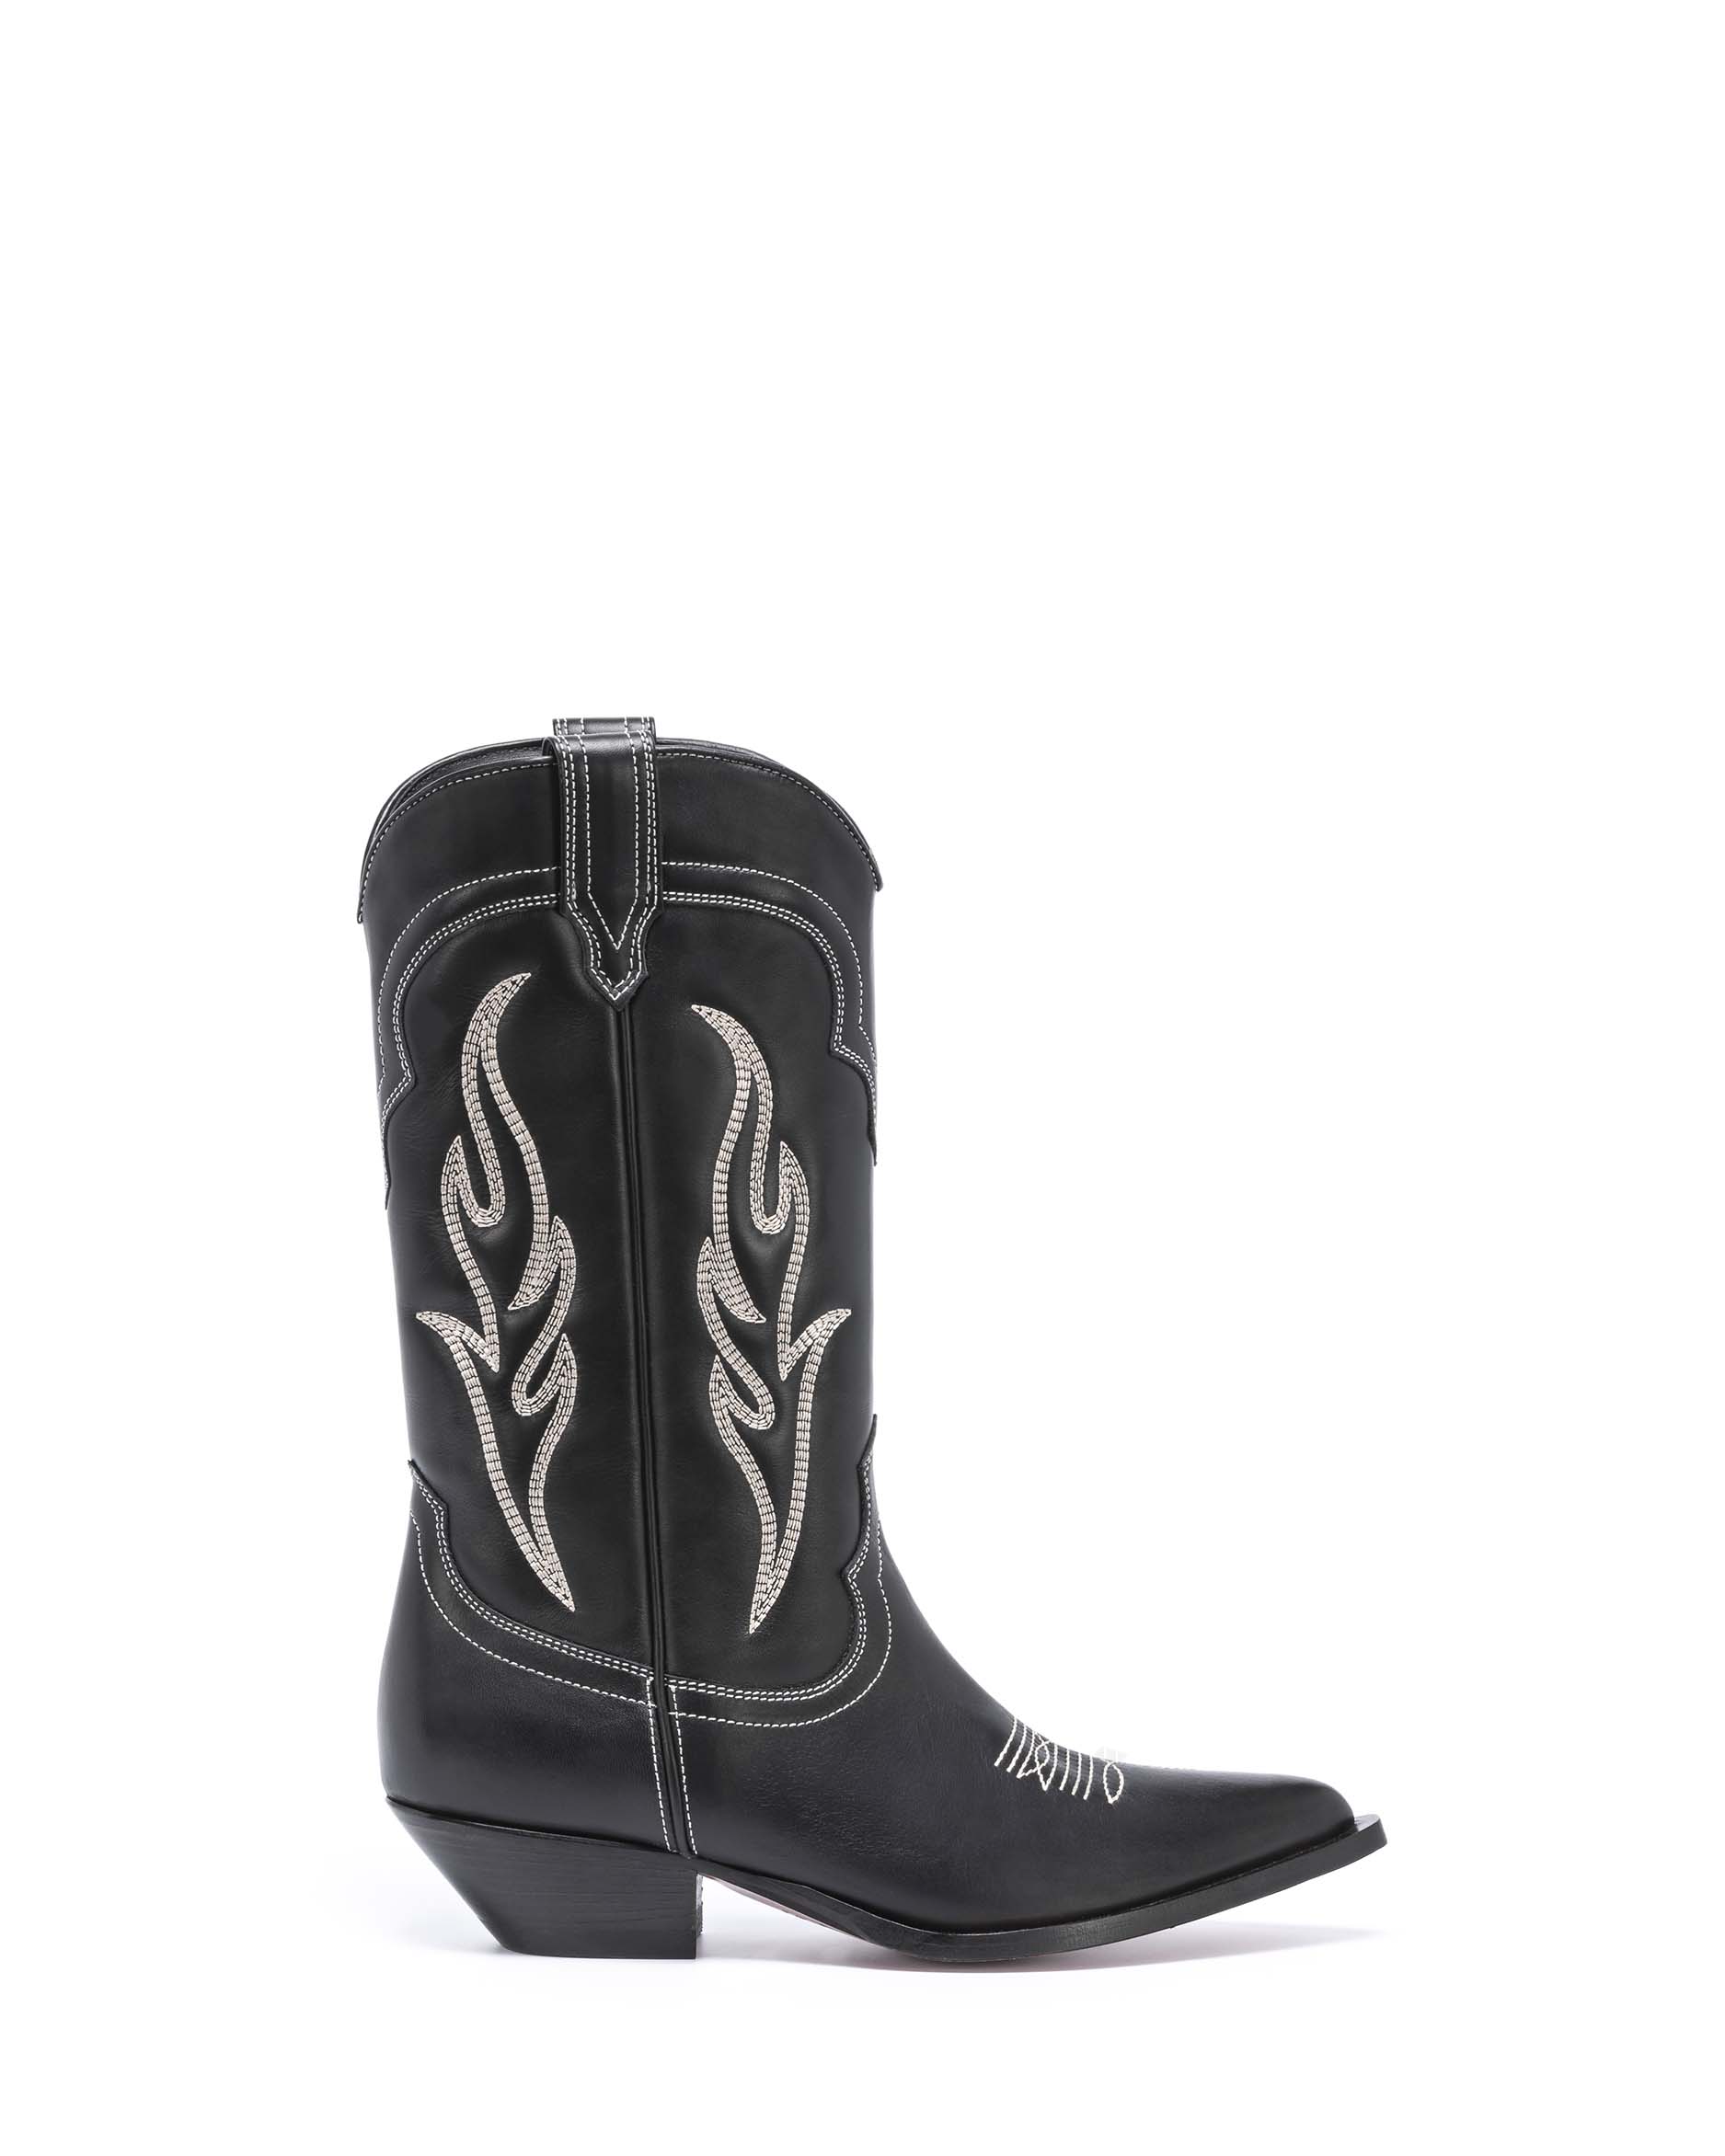 SANTA FE Men's Cowboy Boots in Black Calfskin | Off-White Embroidery_Side_02